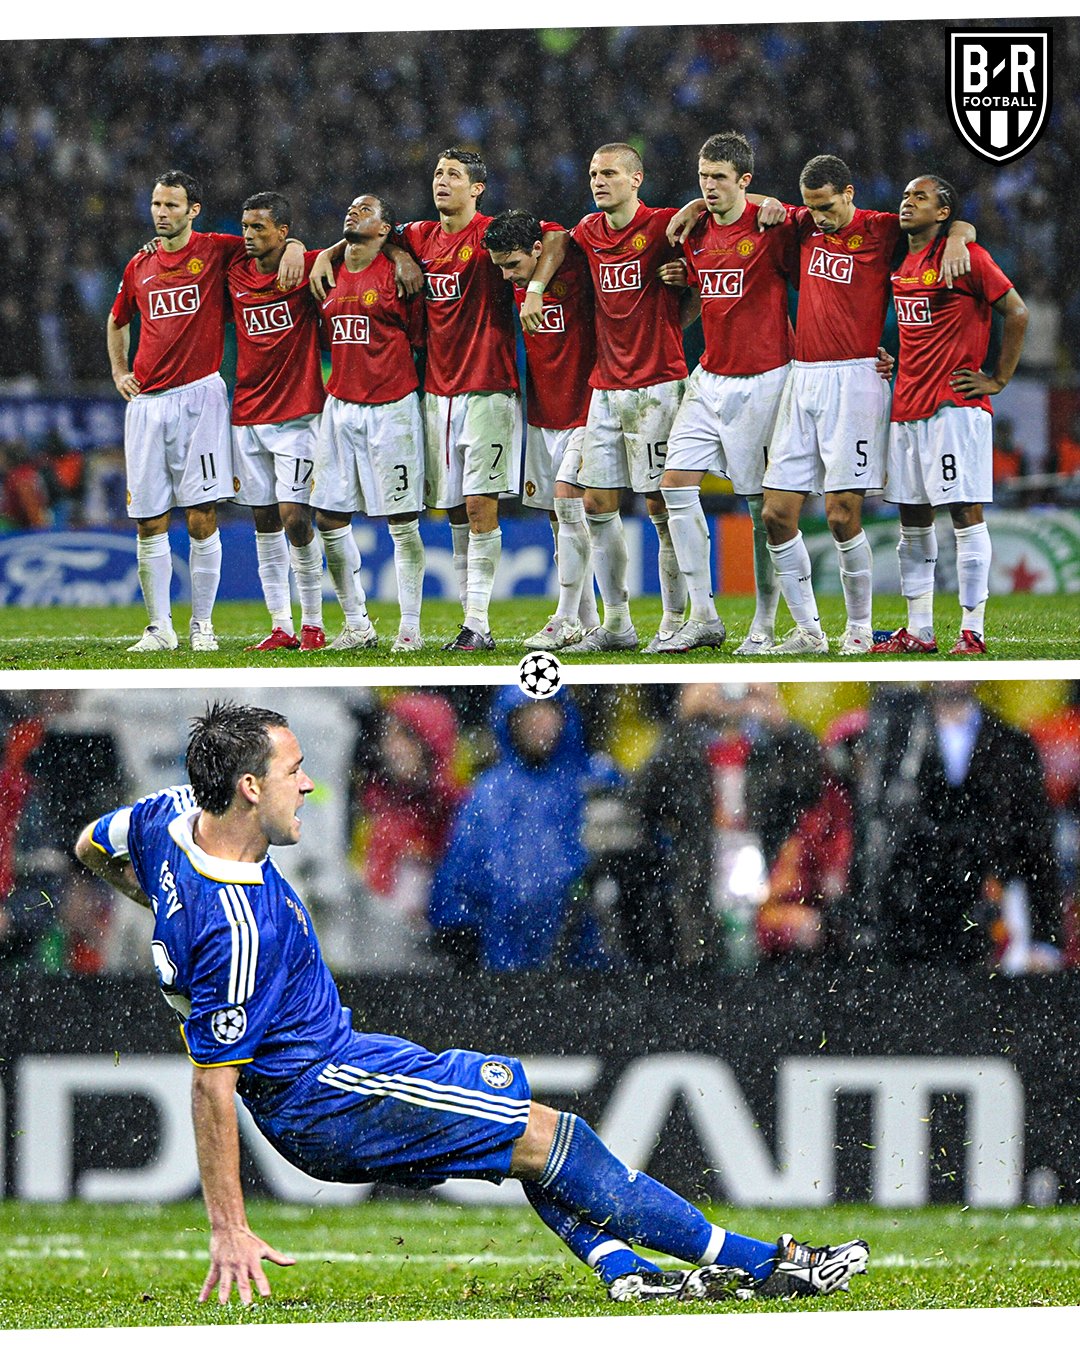 B/R Football on Twitter: "2008 Champions League Final. Manchester Chelsea. The shootout. The slip. The agony. The / Twitter